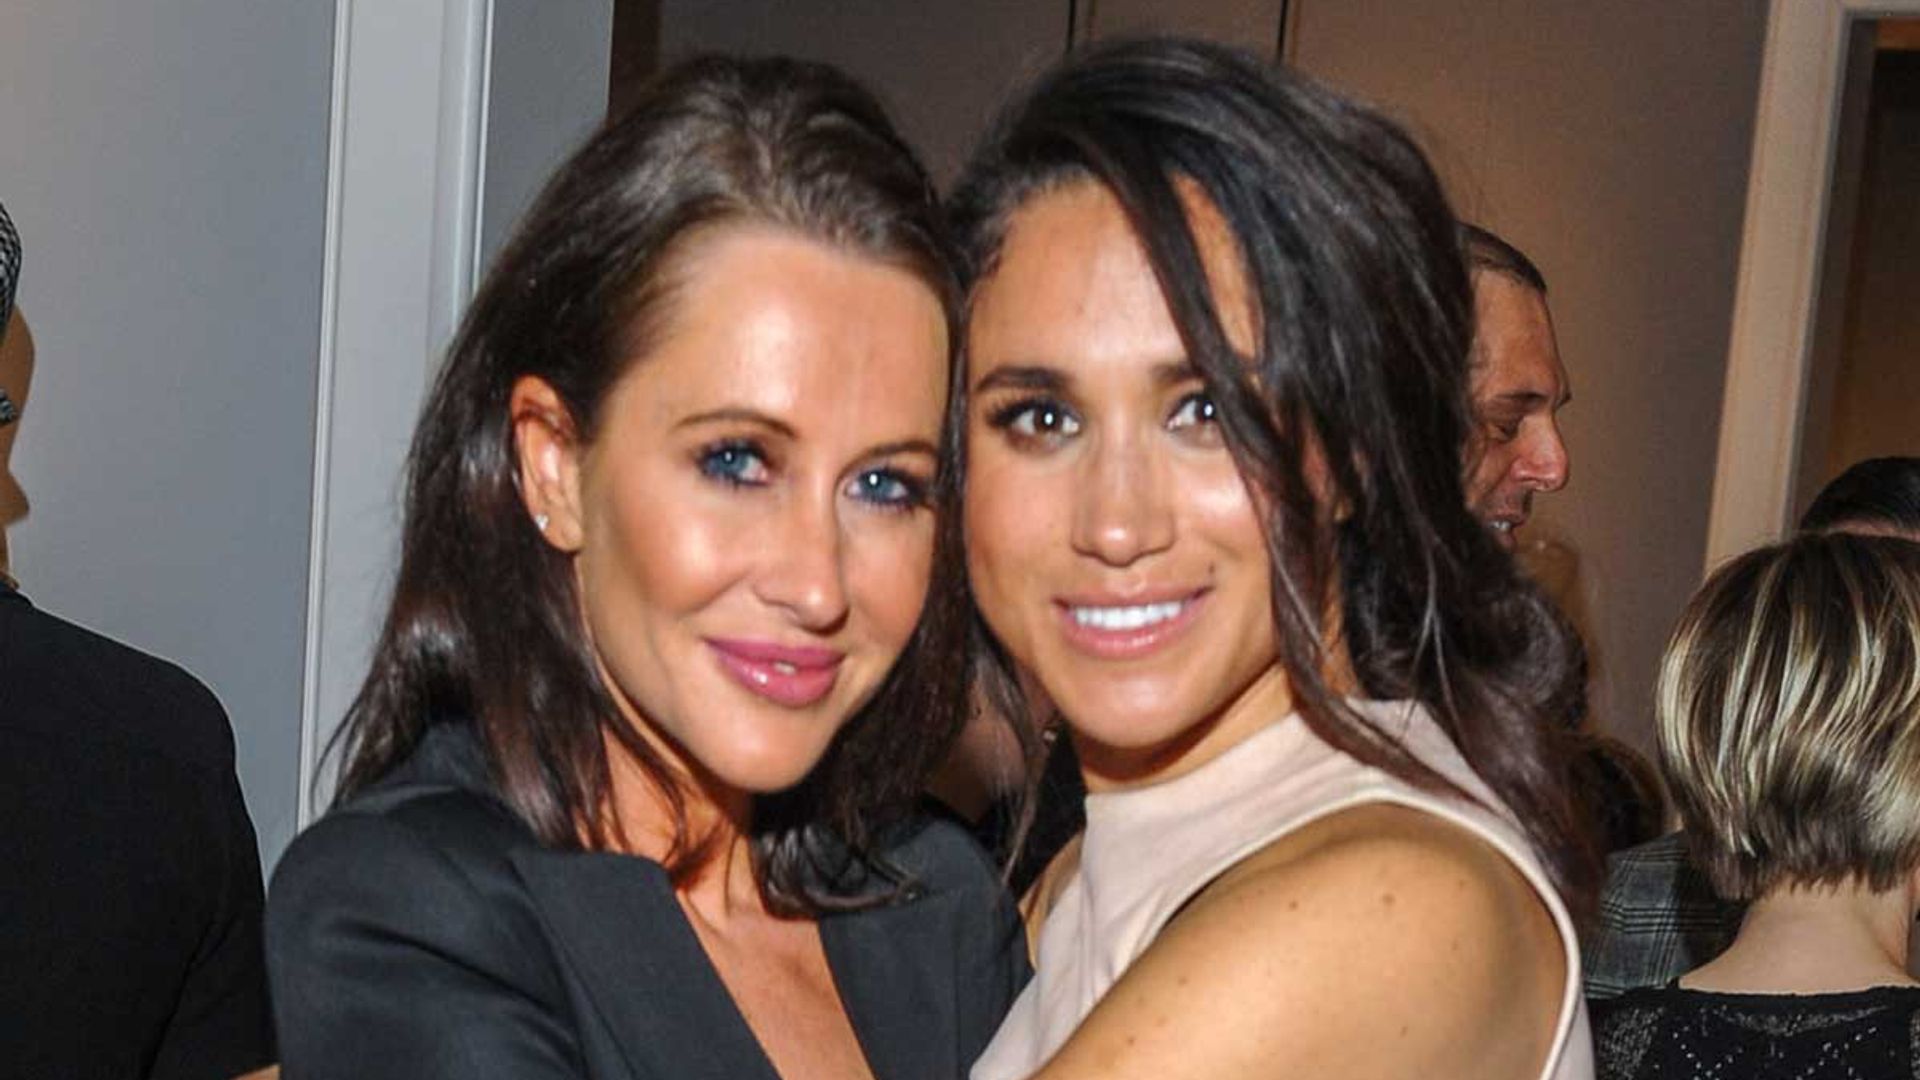 Meghan Markle's best friend Jessica Mulroney travels to meet baby Archie for the first time